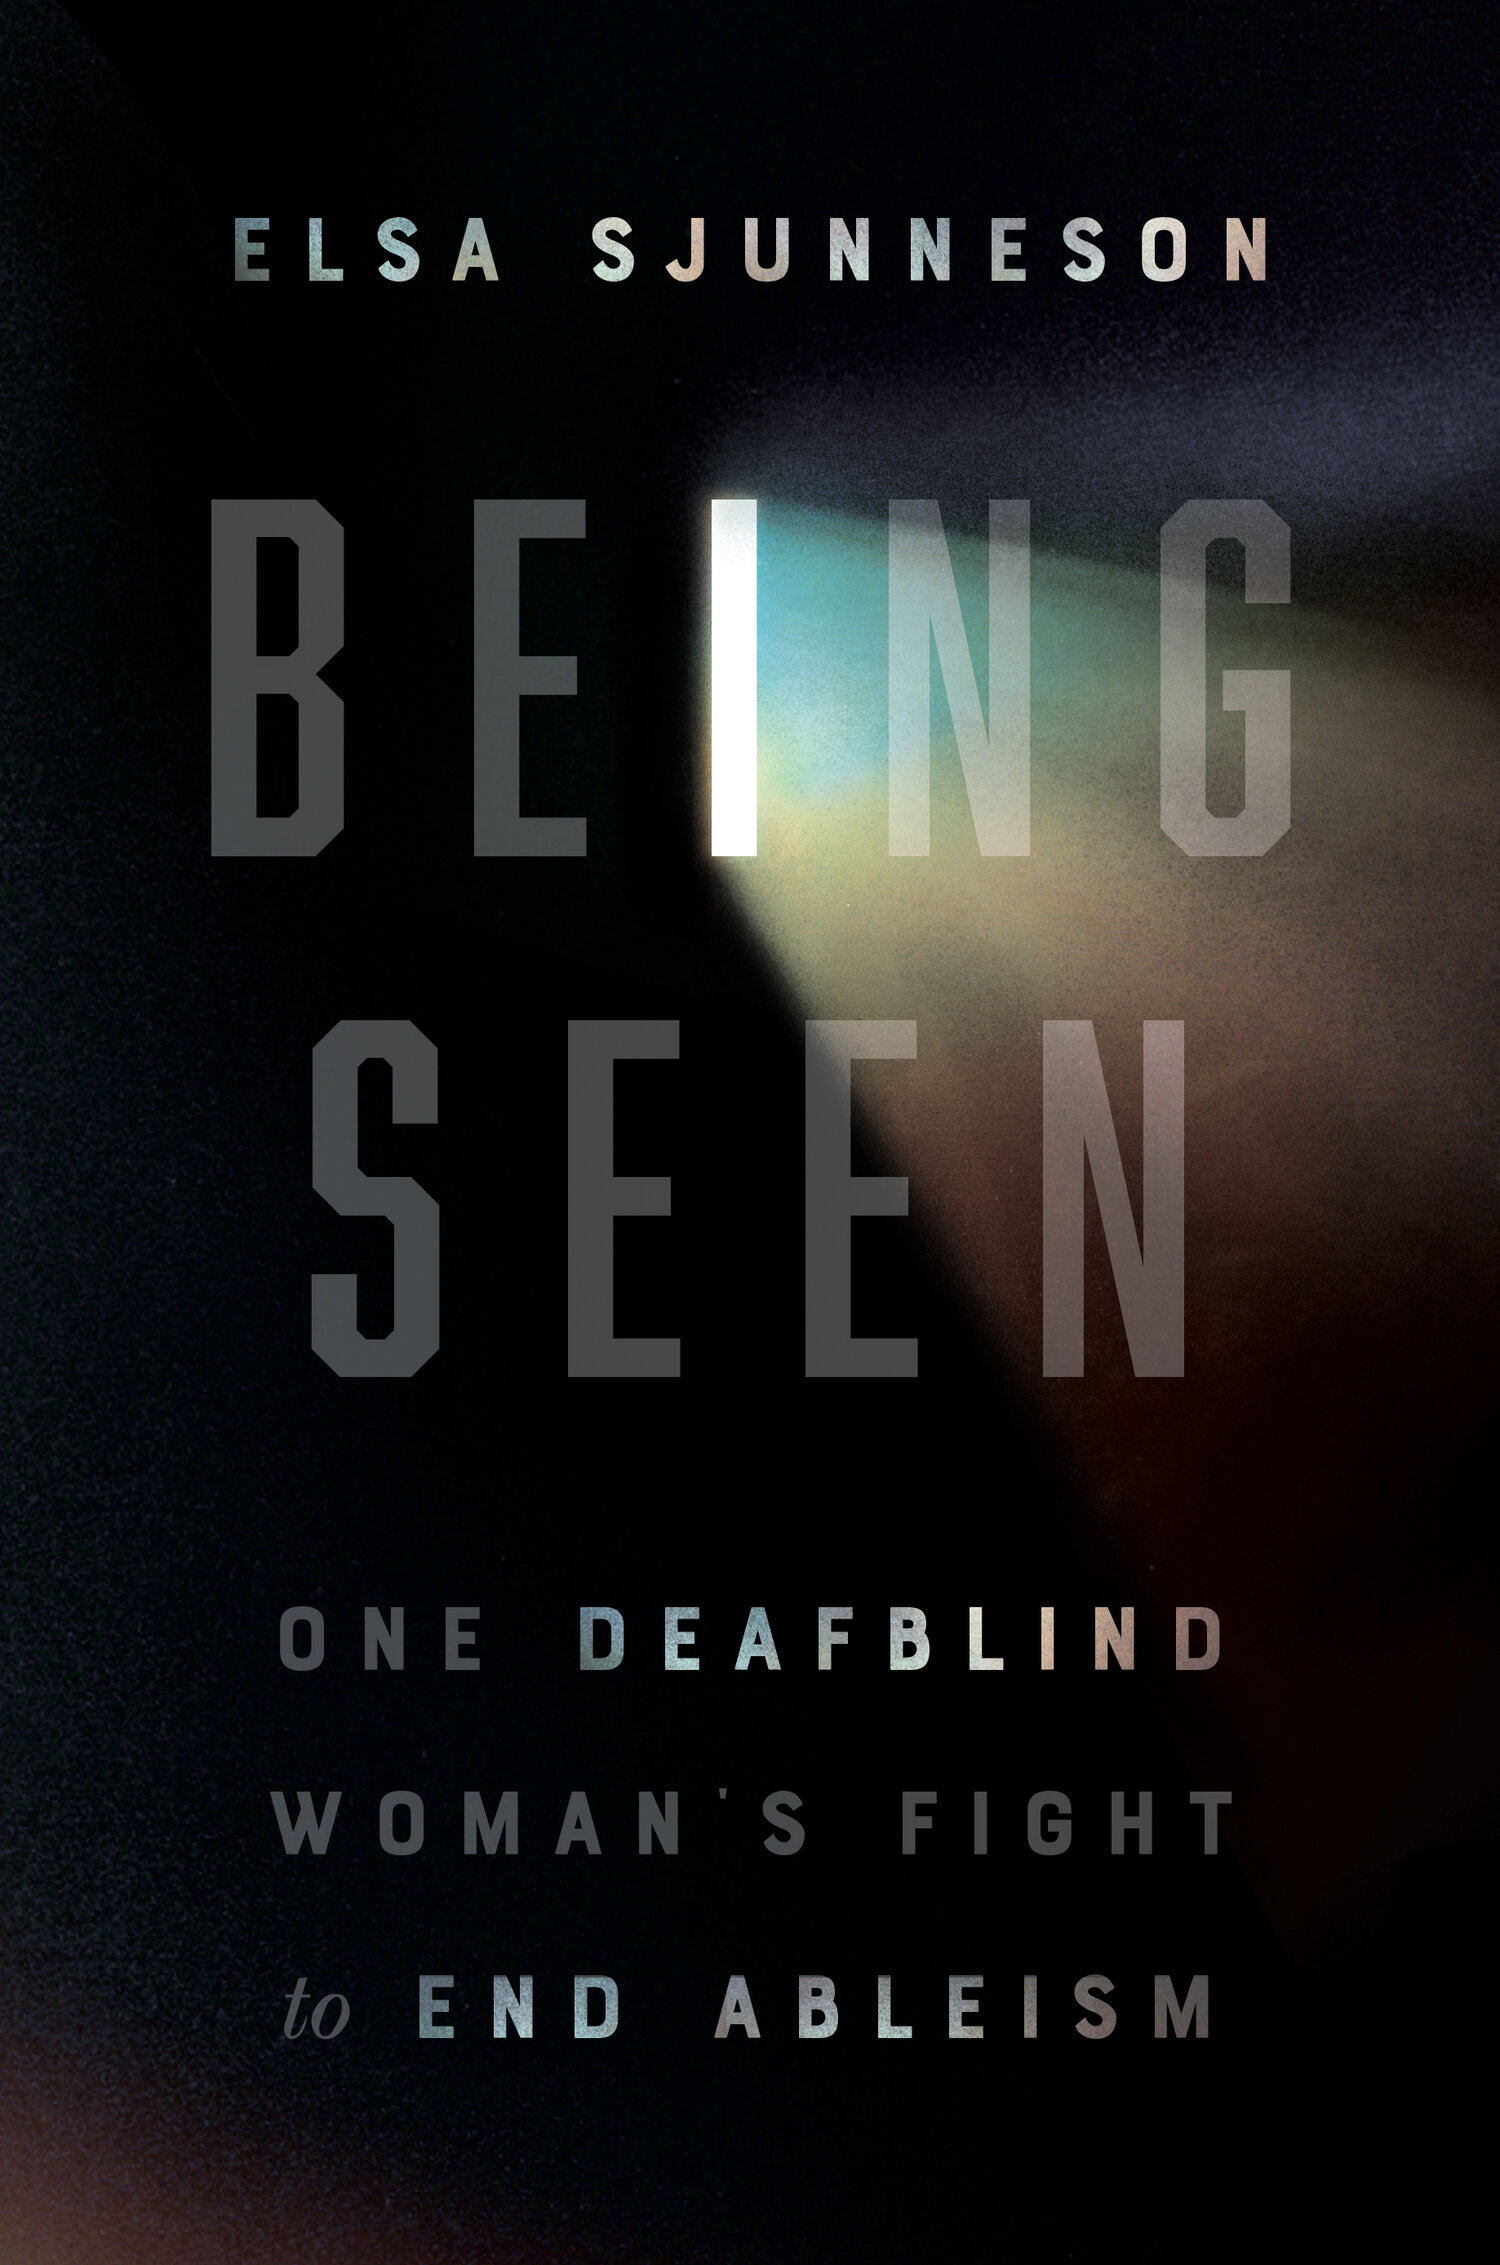 "Being Seen" book cover